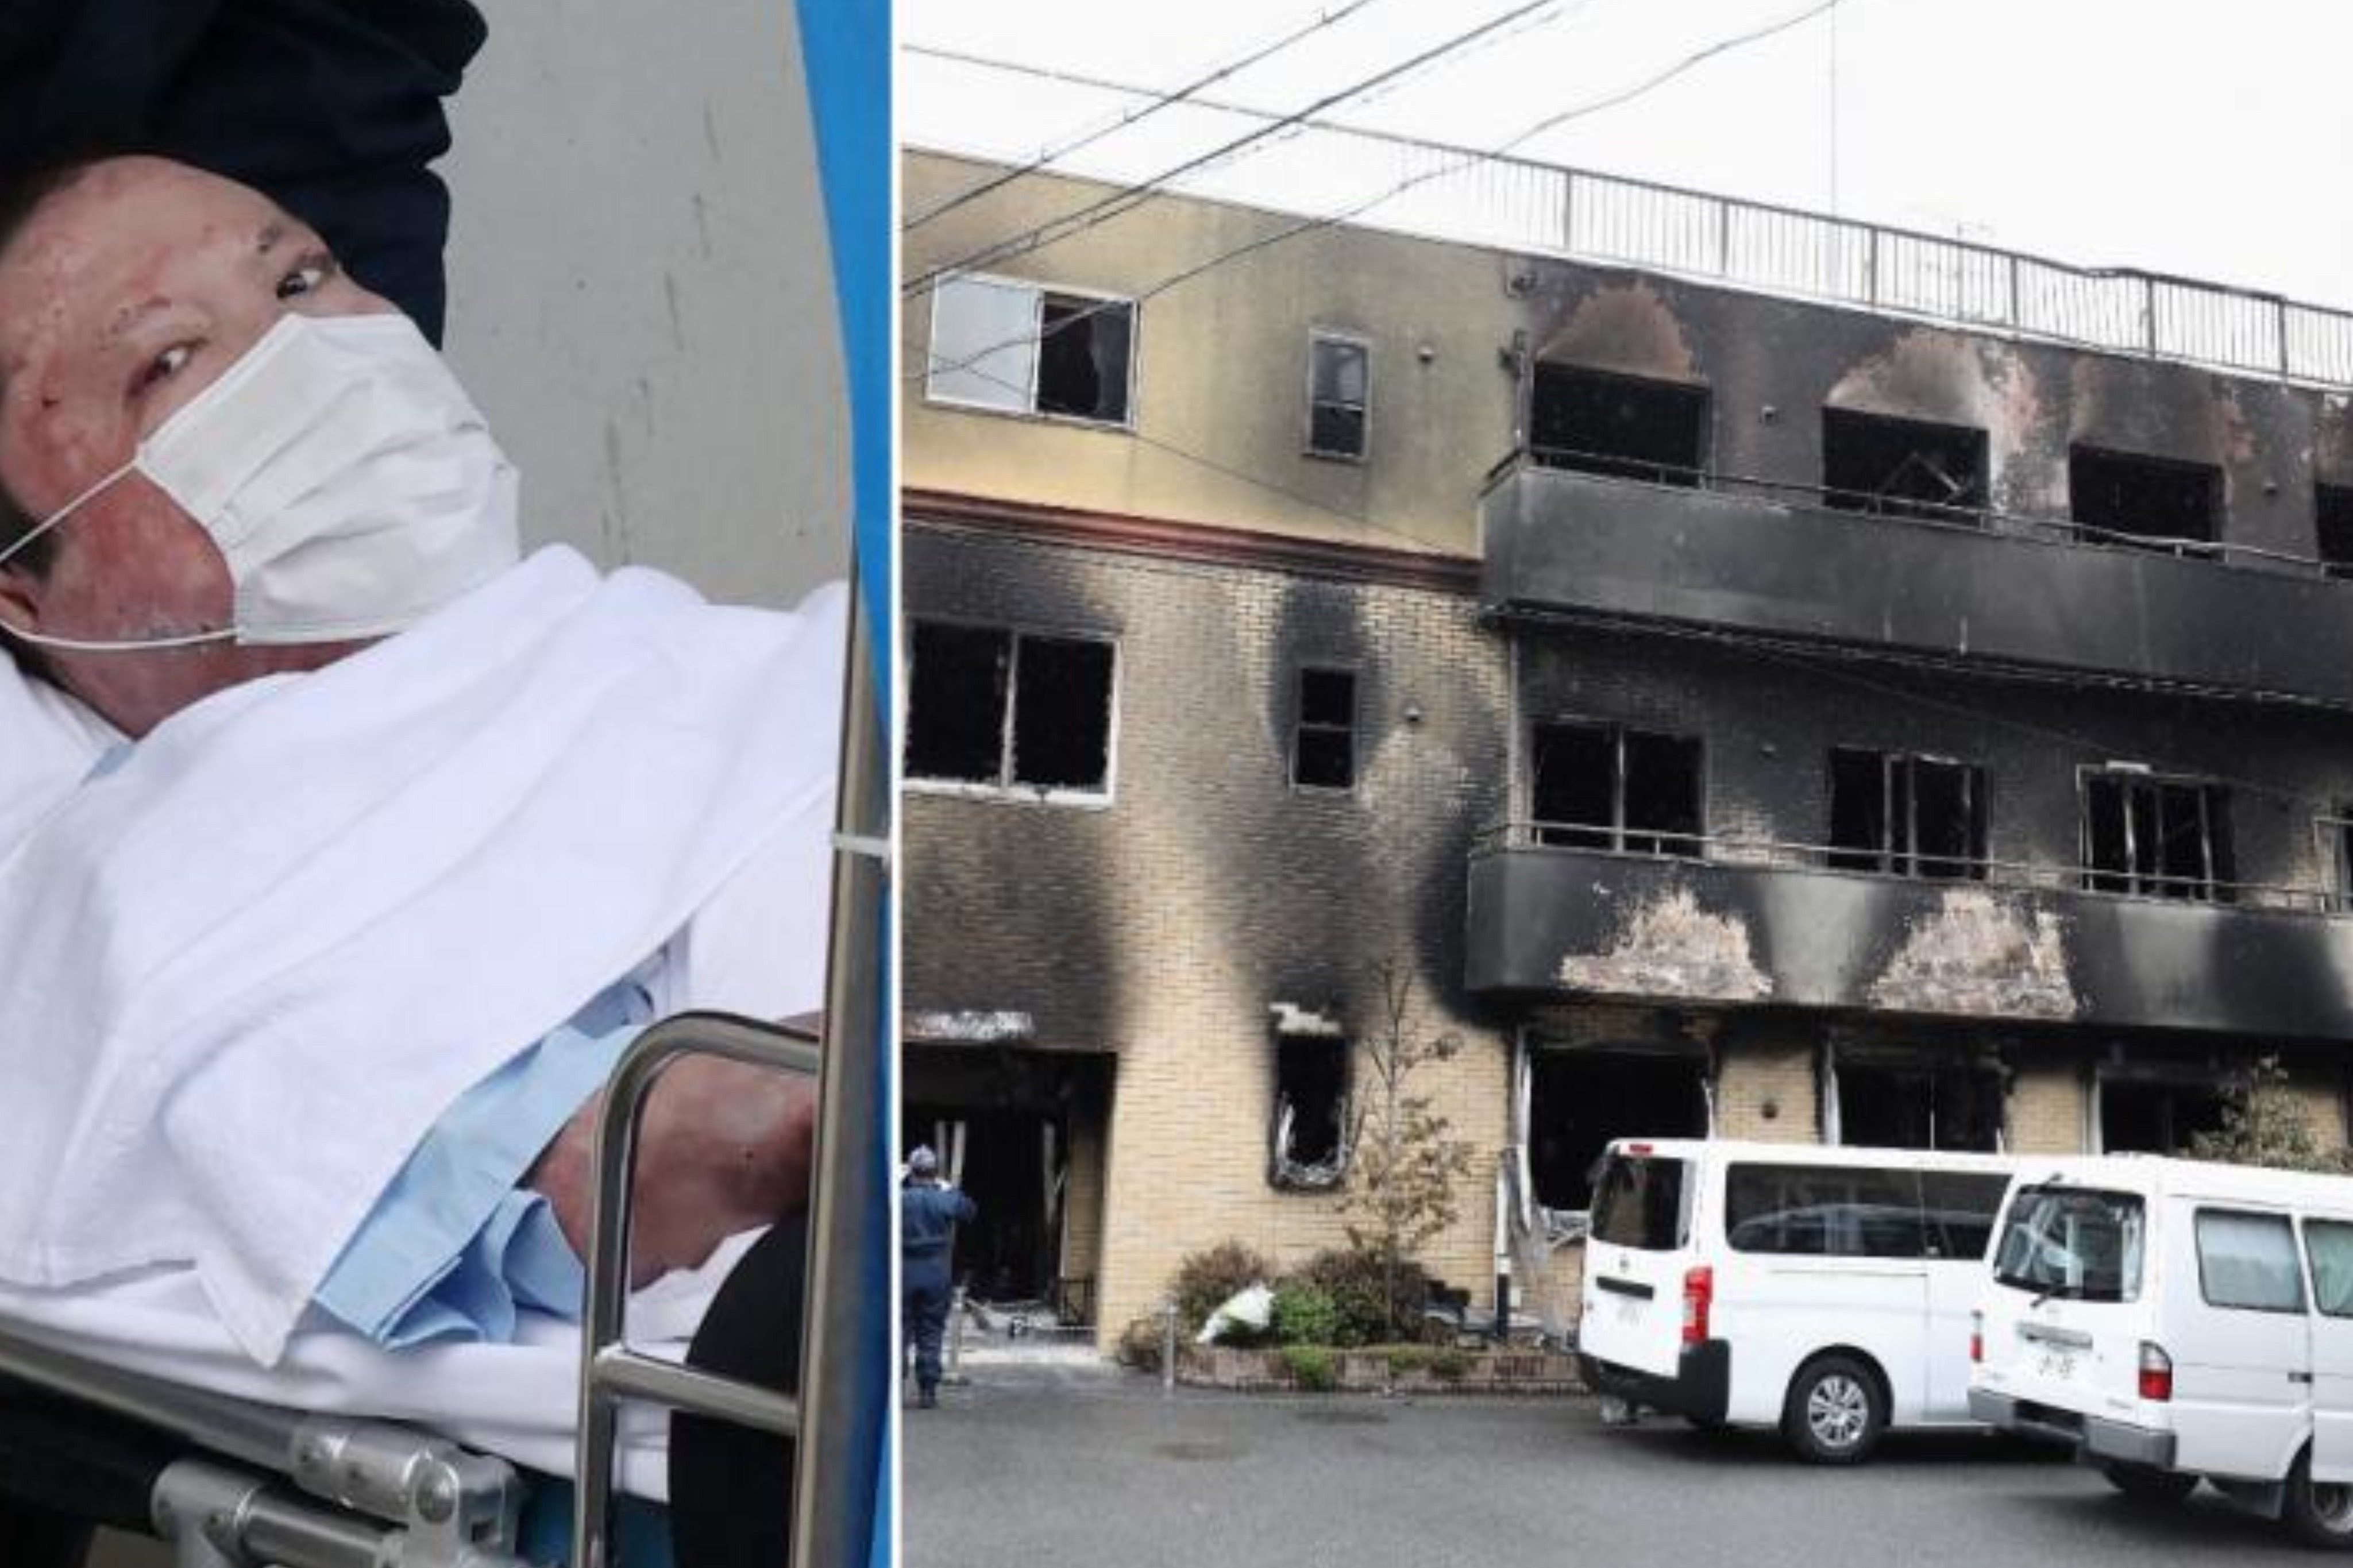 Japan: the man accused of the fatal fire at an animation studio has admitted the facts